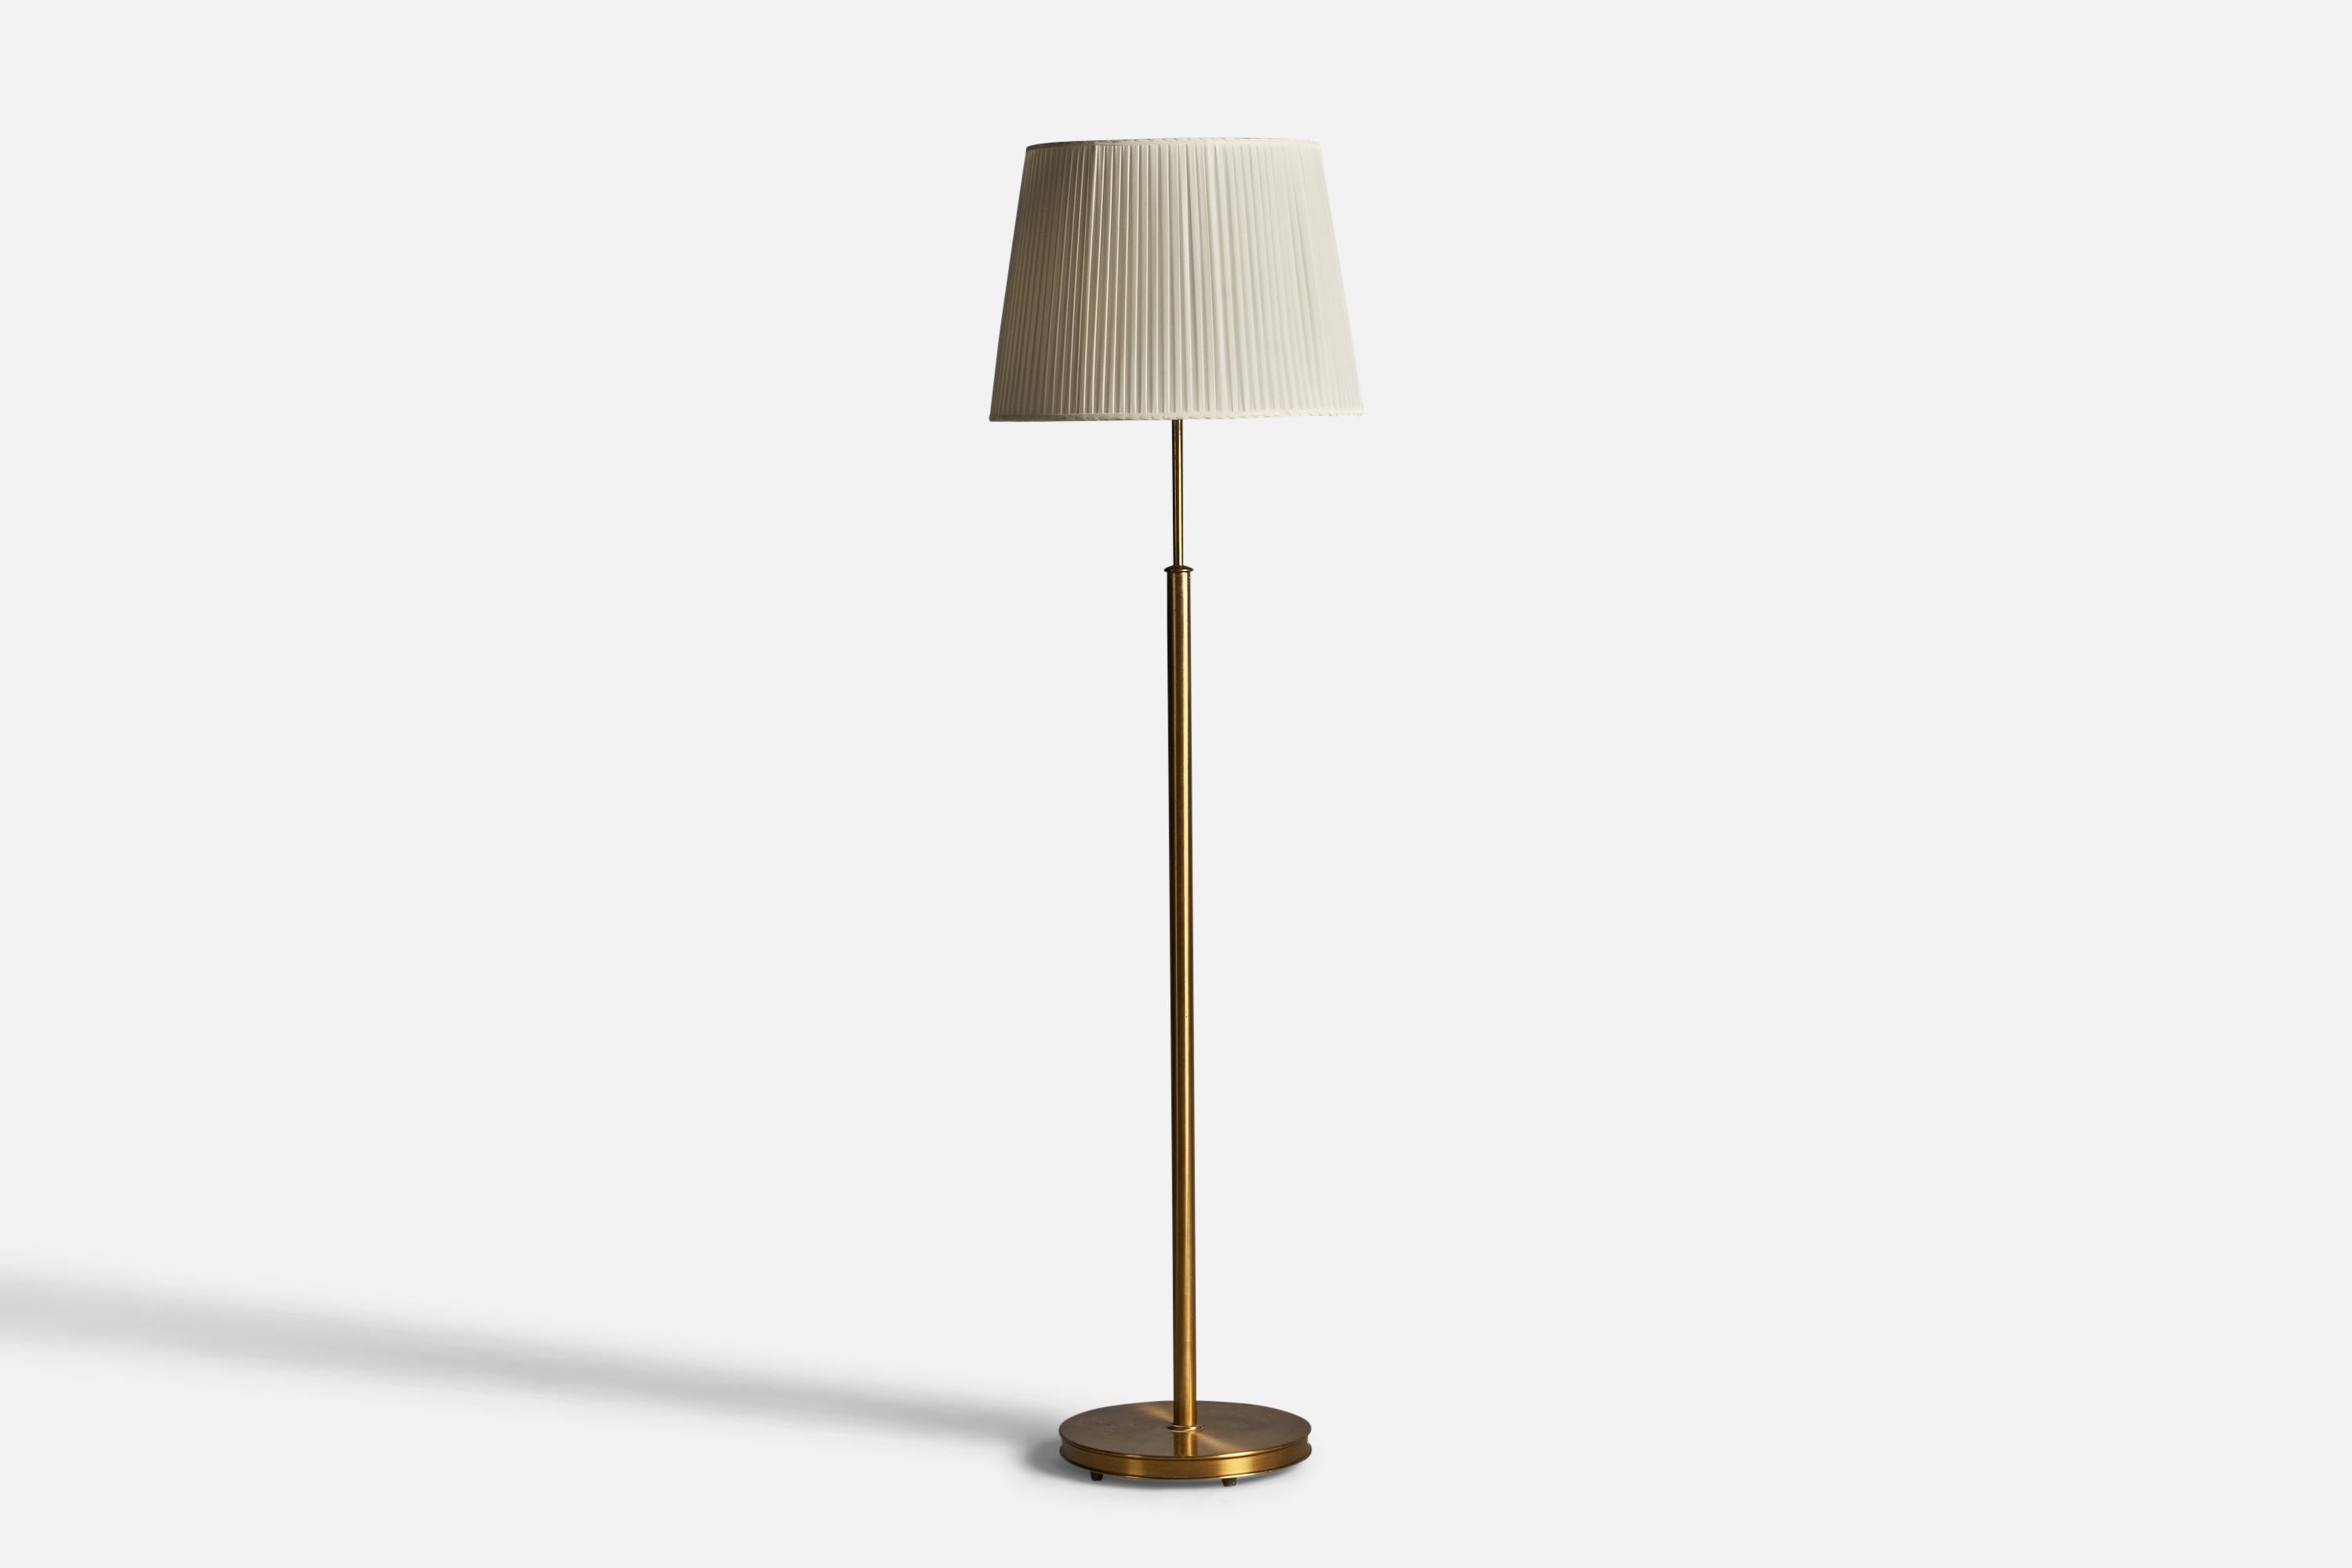 A brass and fabric floor lamp, designed by Josef Frank and produced by Svenskt Tenn, Sweden, 1940s.

Overall Dimensions (inches): 60.75